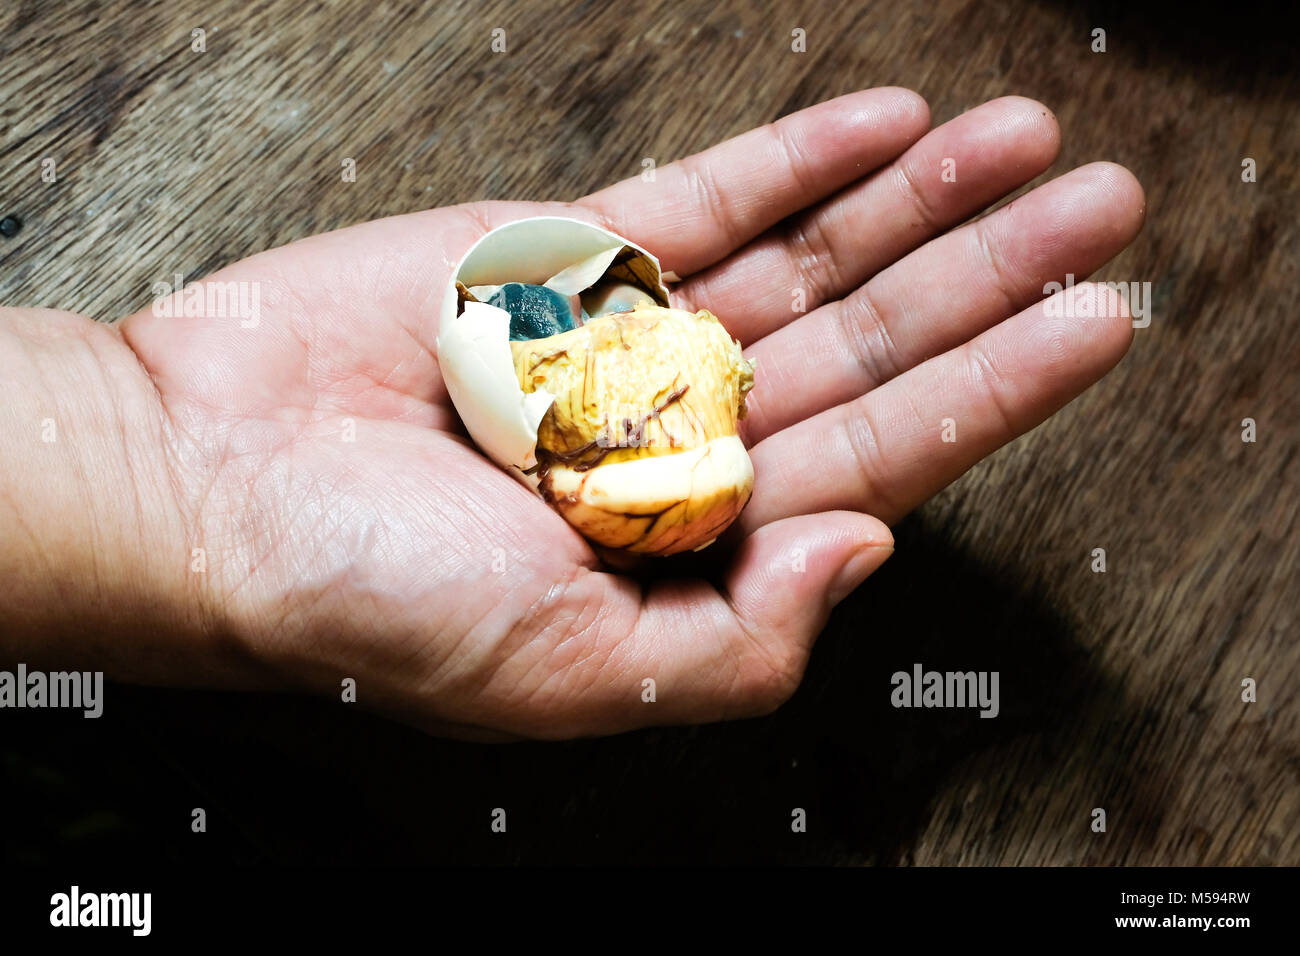 A partially opened balut, cooked fertilized duck egg, pictured on a hand in Metro Manila, The Philippines Stock Photo